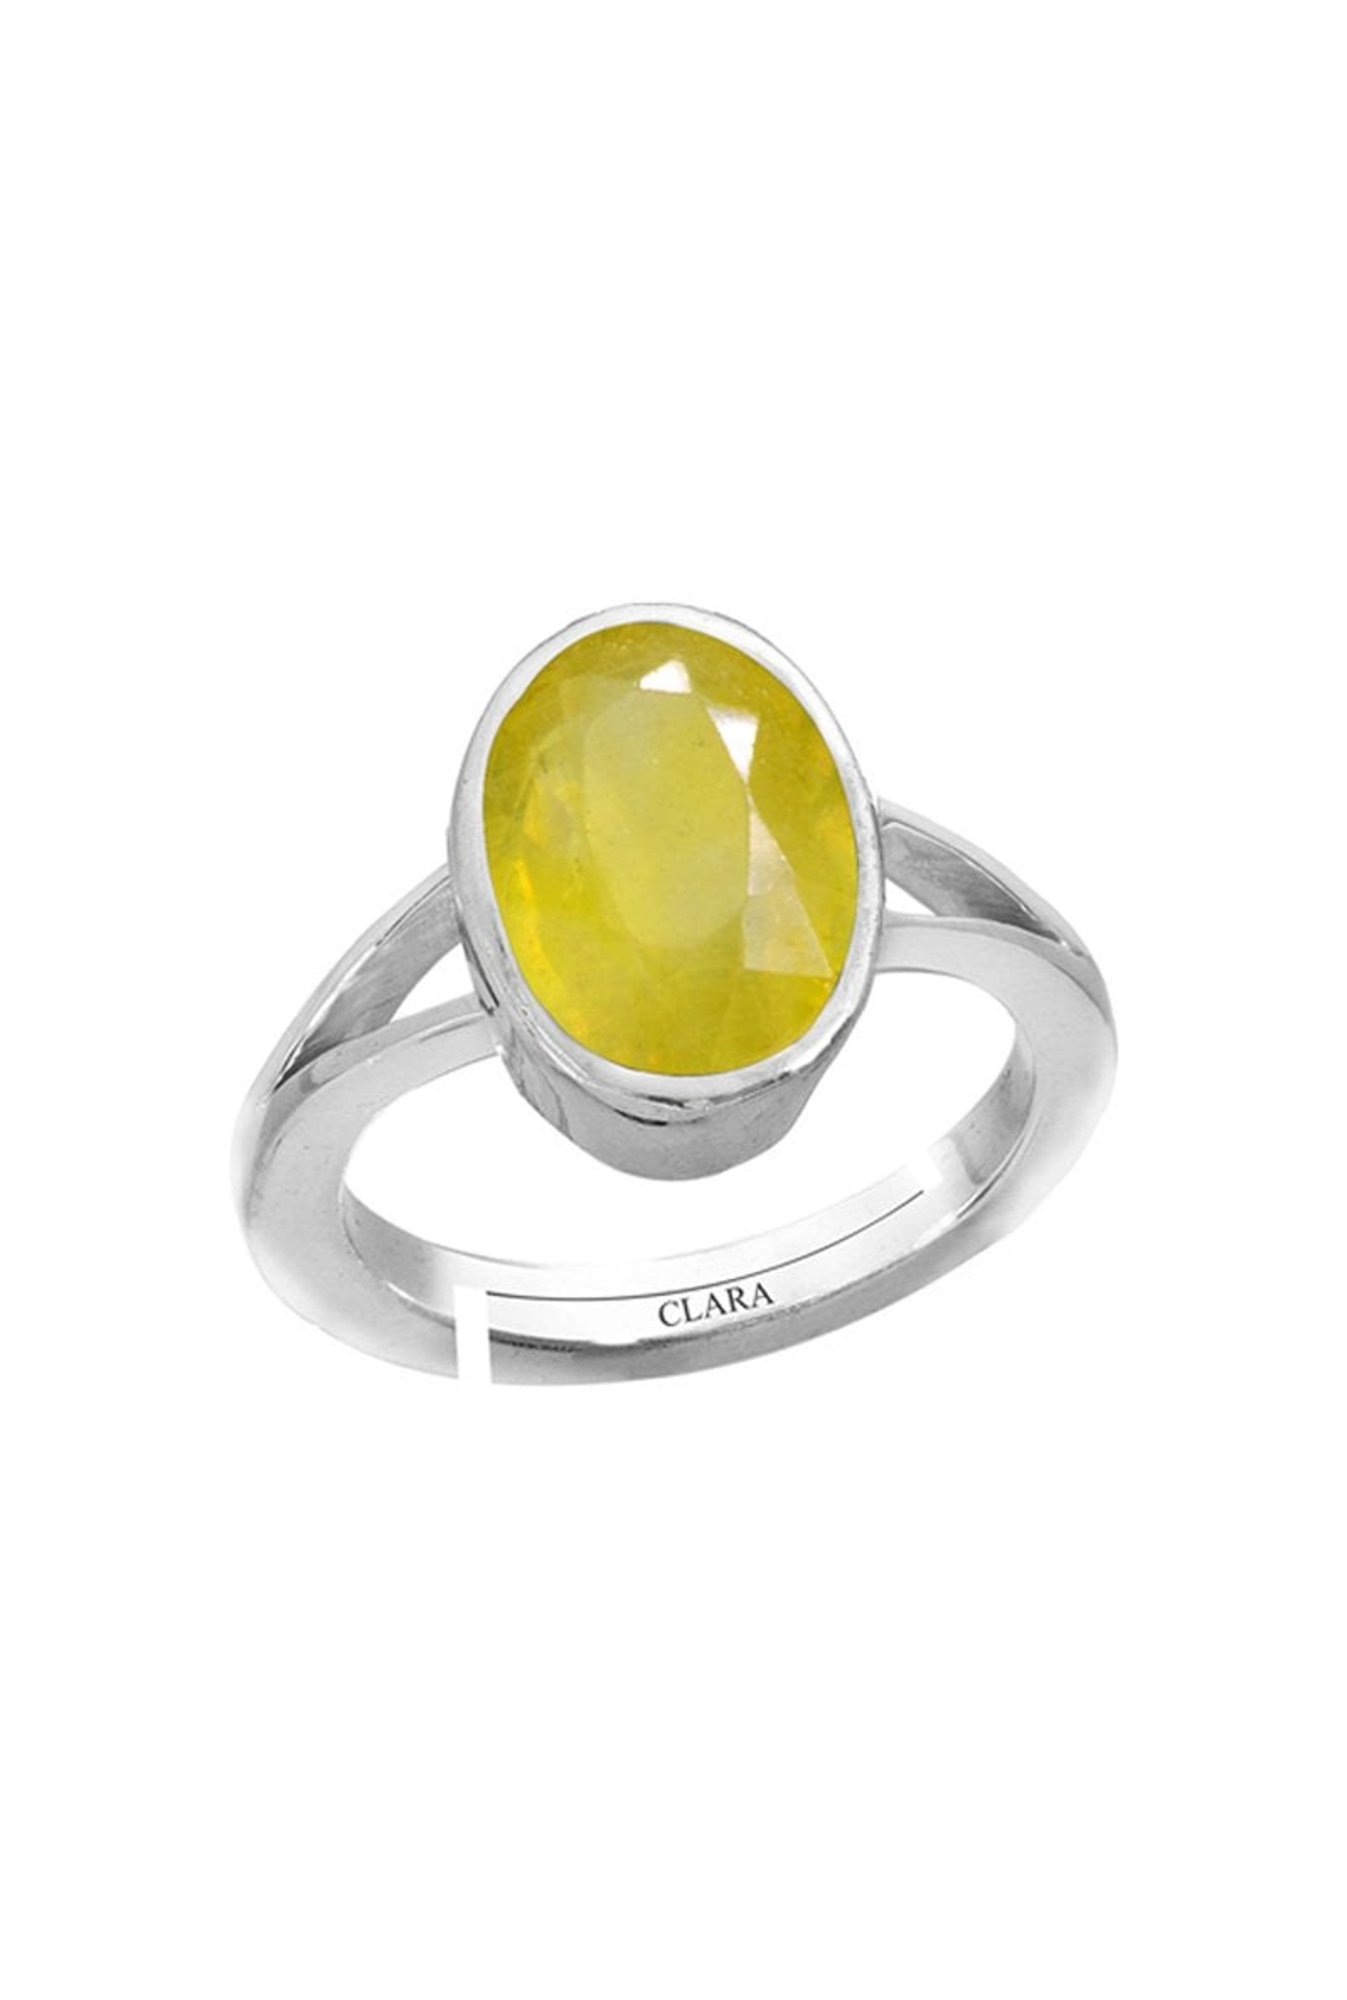 Yellow Sapphire Natural Genuine Gemstone Sterling silver ring RSS,1176 –  Barygems